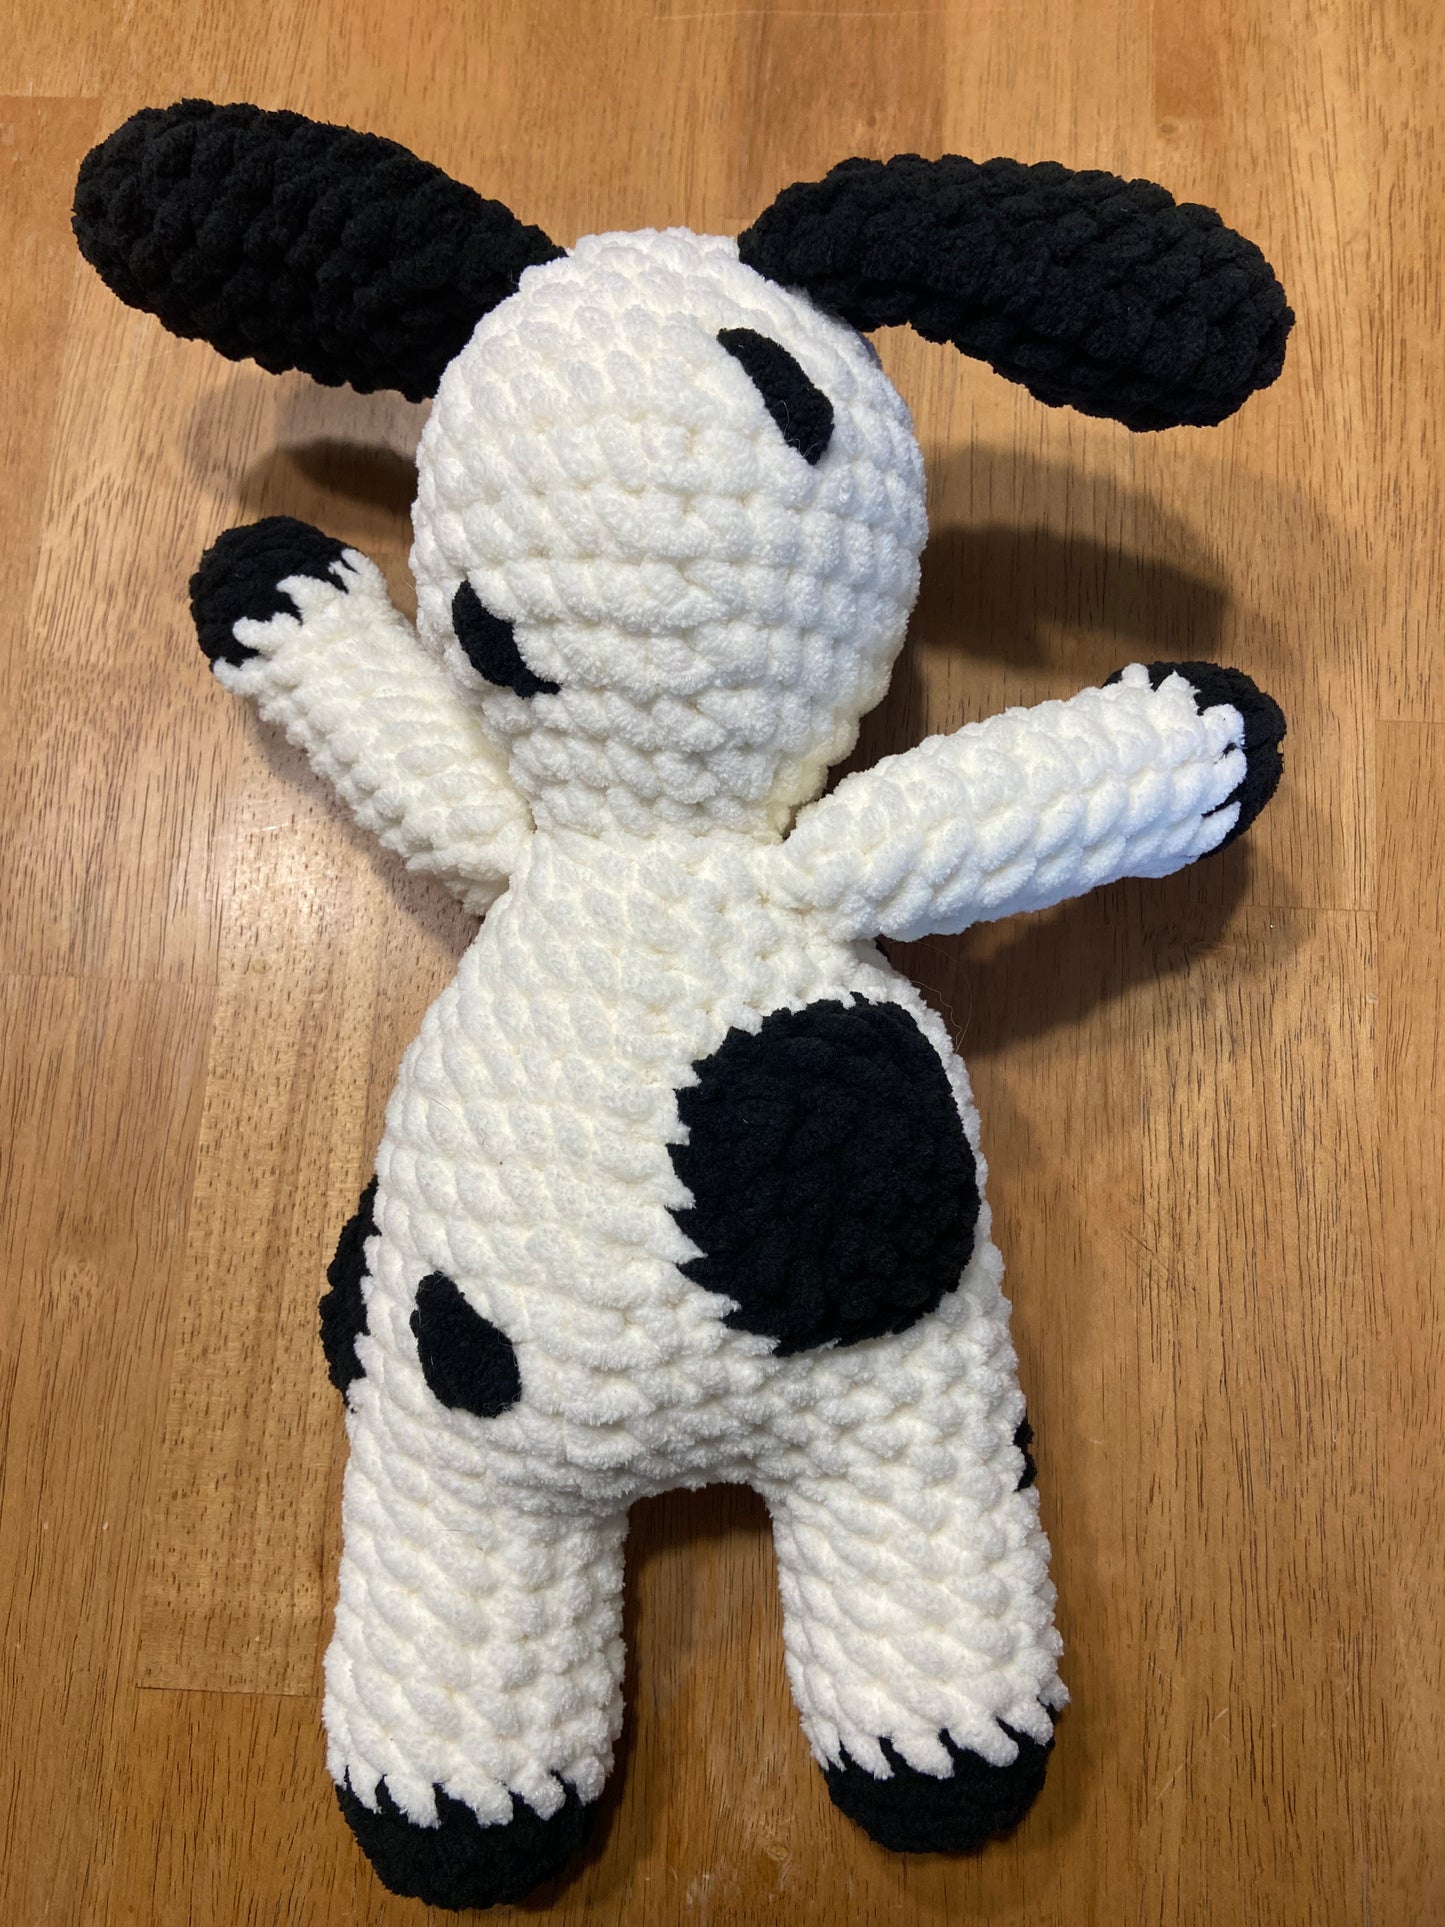 Handcrafted Crochet Cow: Adorable and Soft Plush Toy for Kids